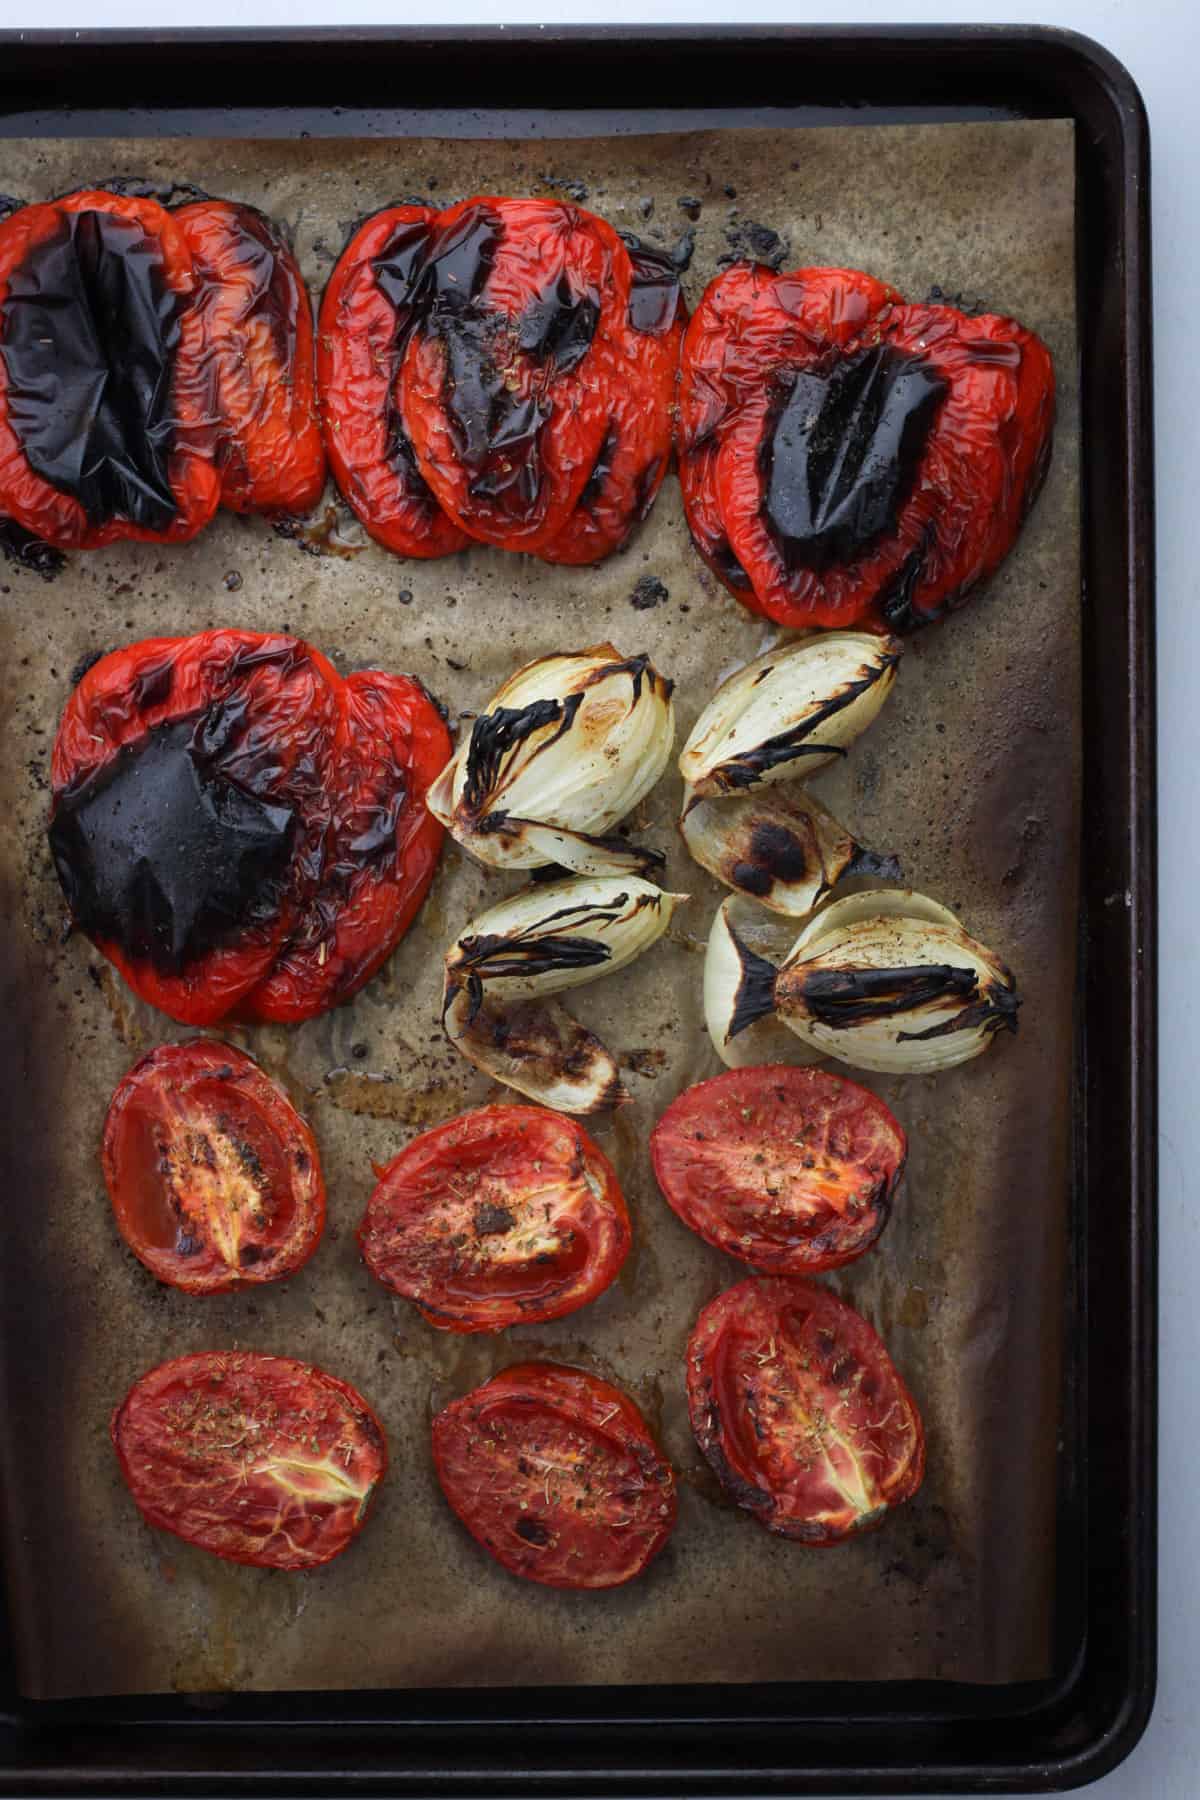 A sheet tray with roasted red peppers, charred onions and roasted Roma tomatoes.